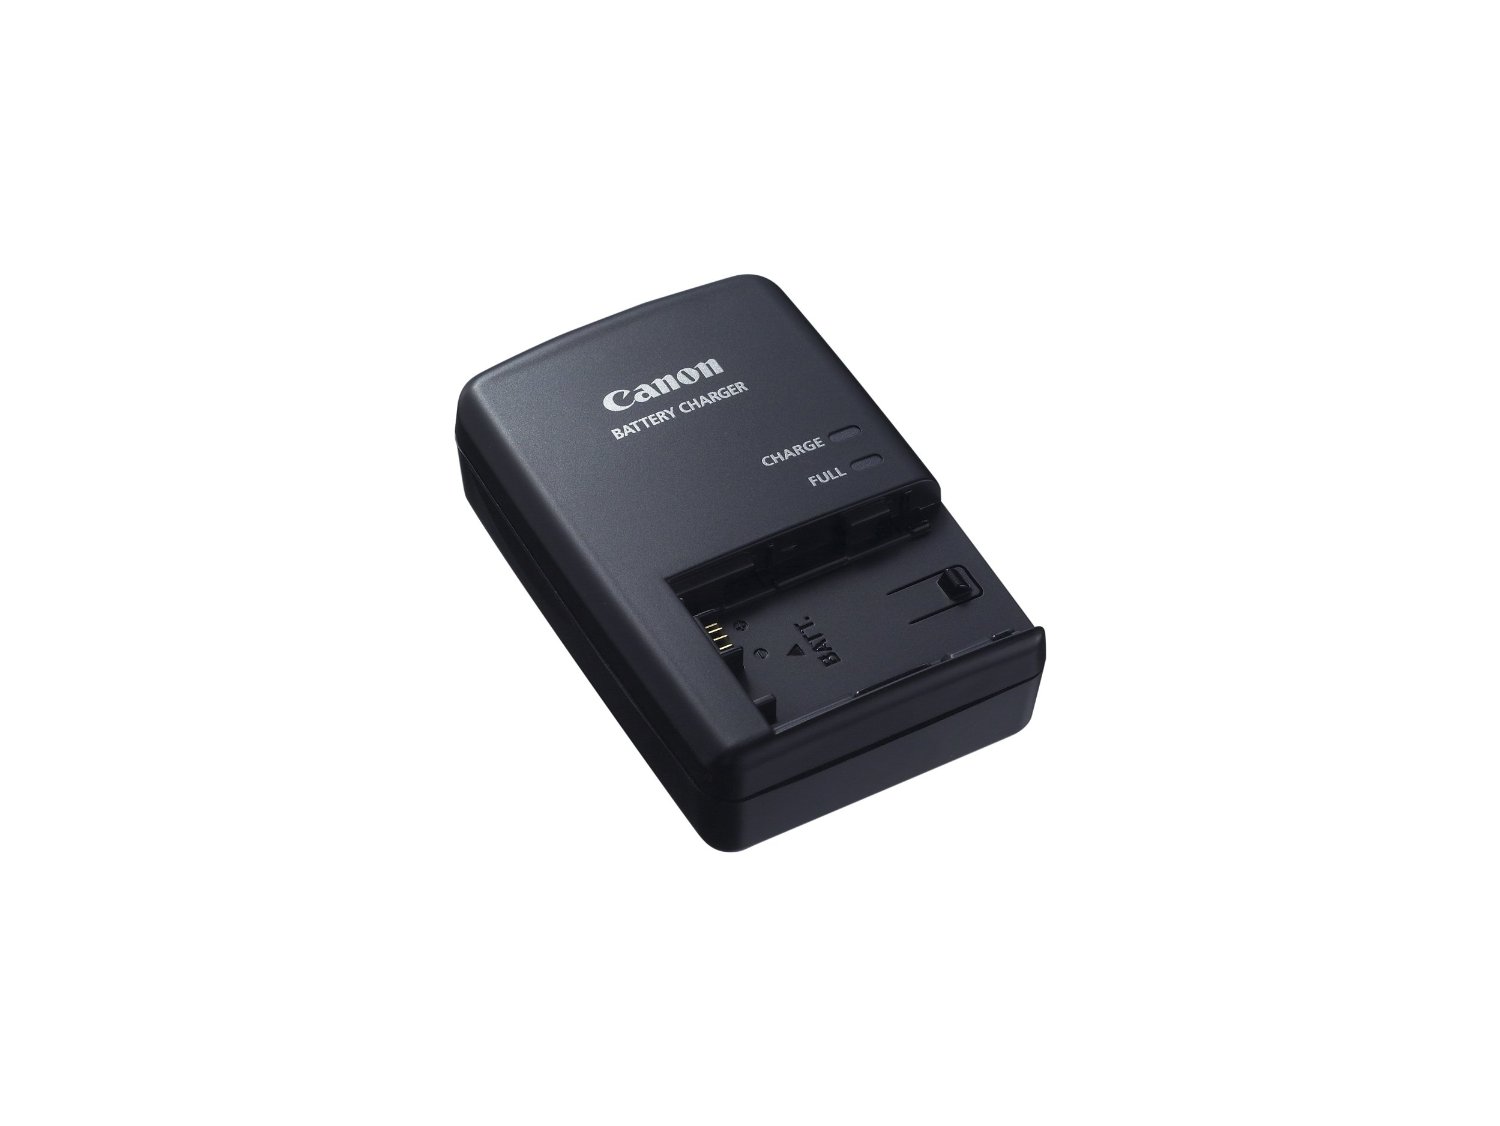 Canon Battery Charger CG-800